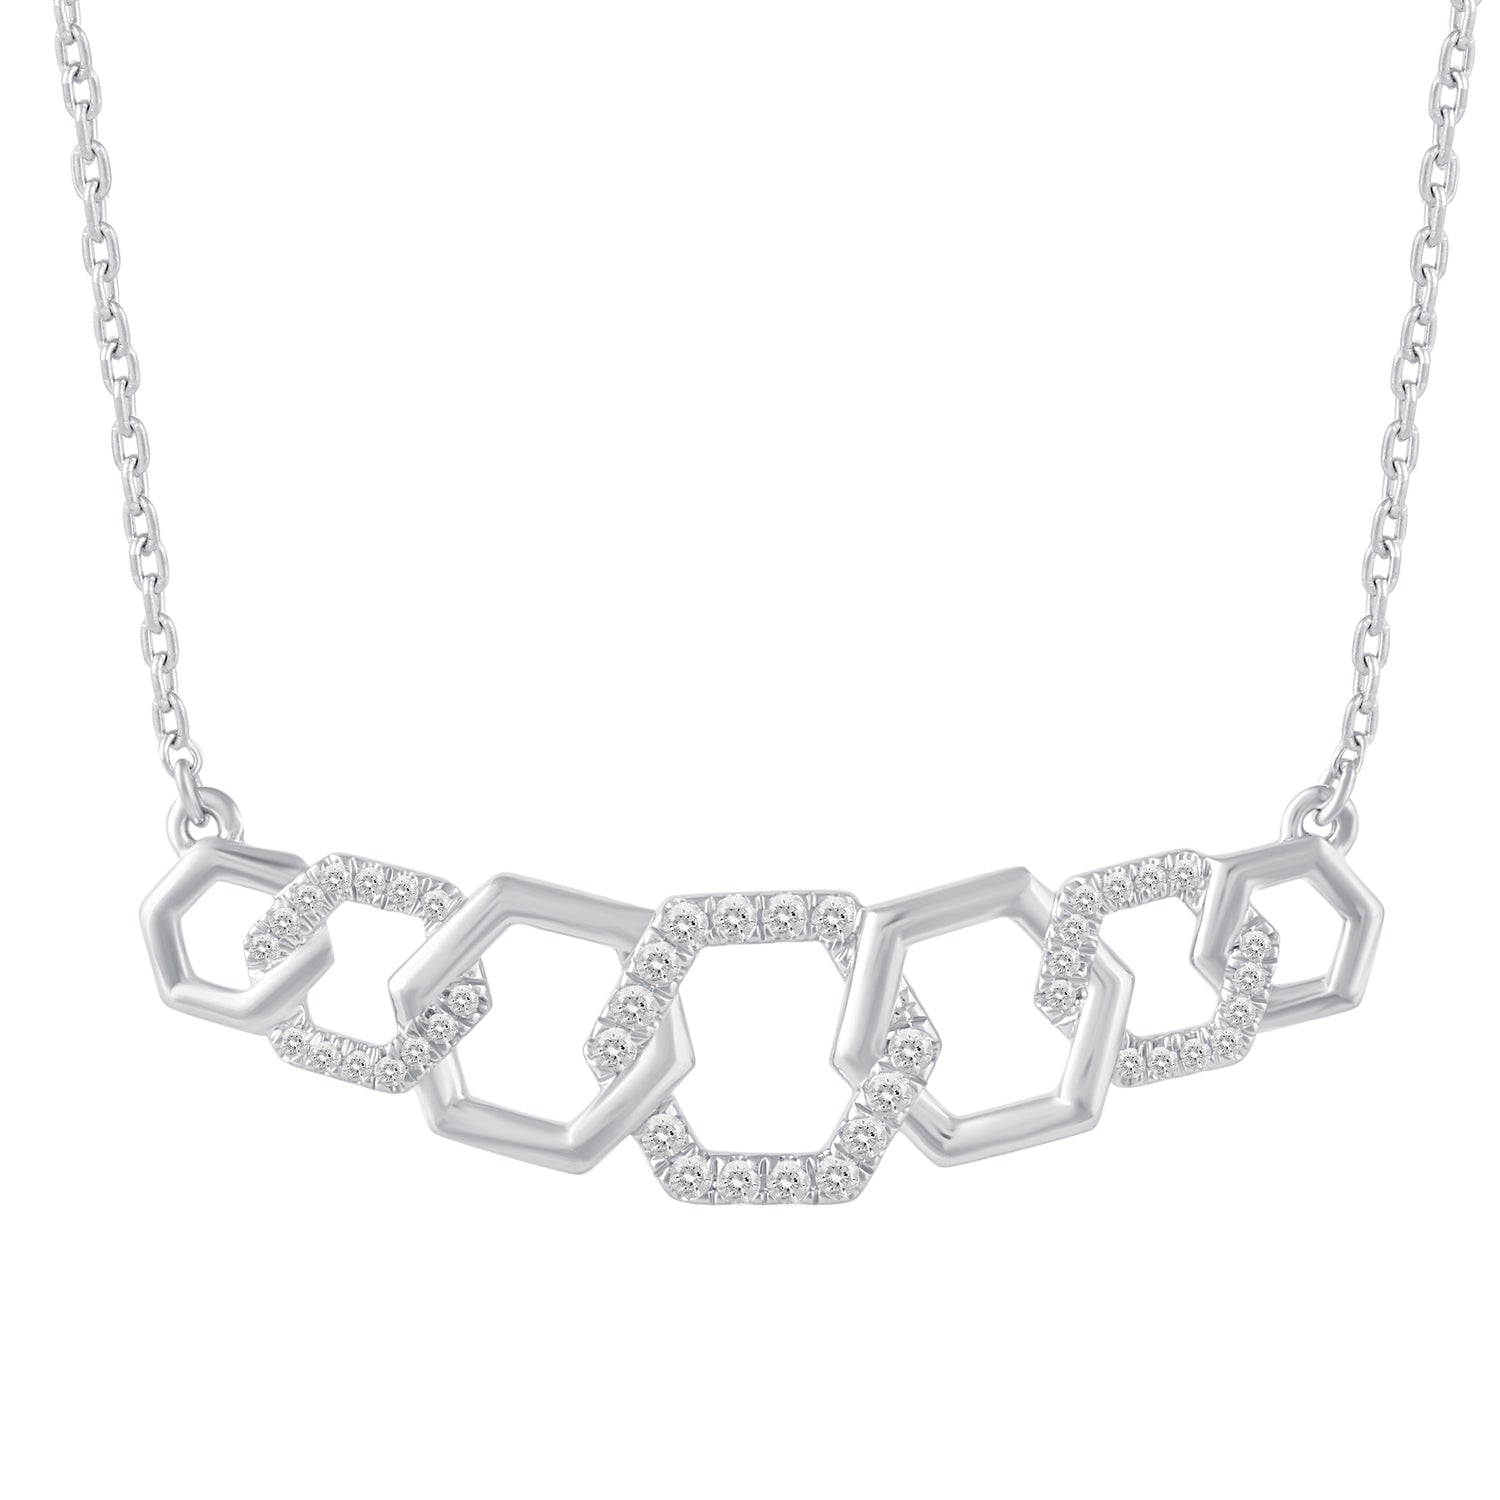 1/4 Cttw Diamond Chain Link Infinity Hexagon Pendant Necklace set in 925 Sterling Silver